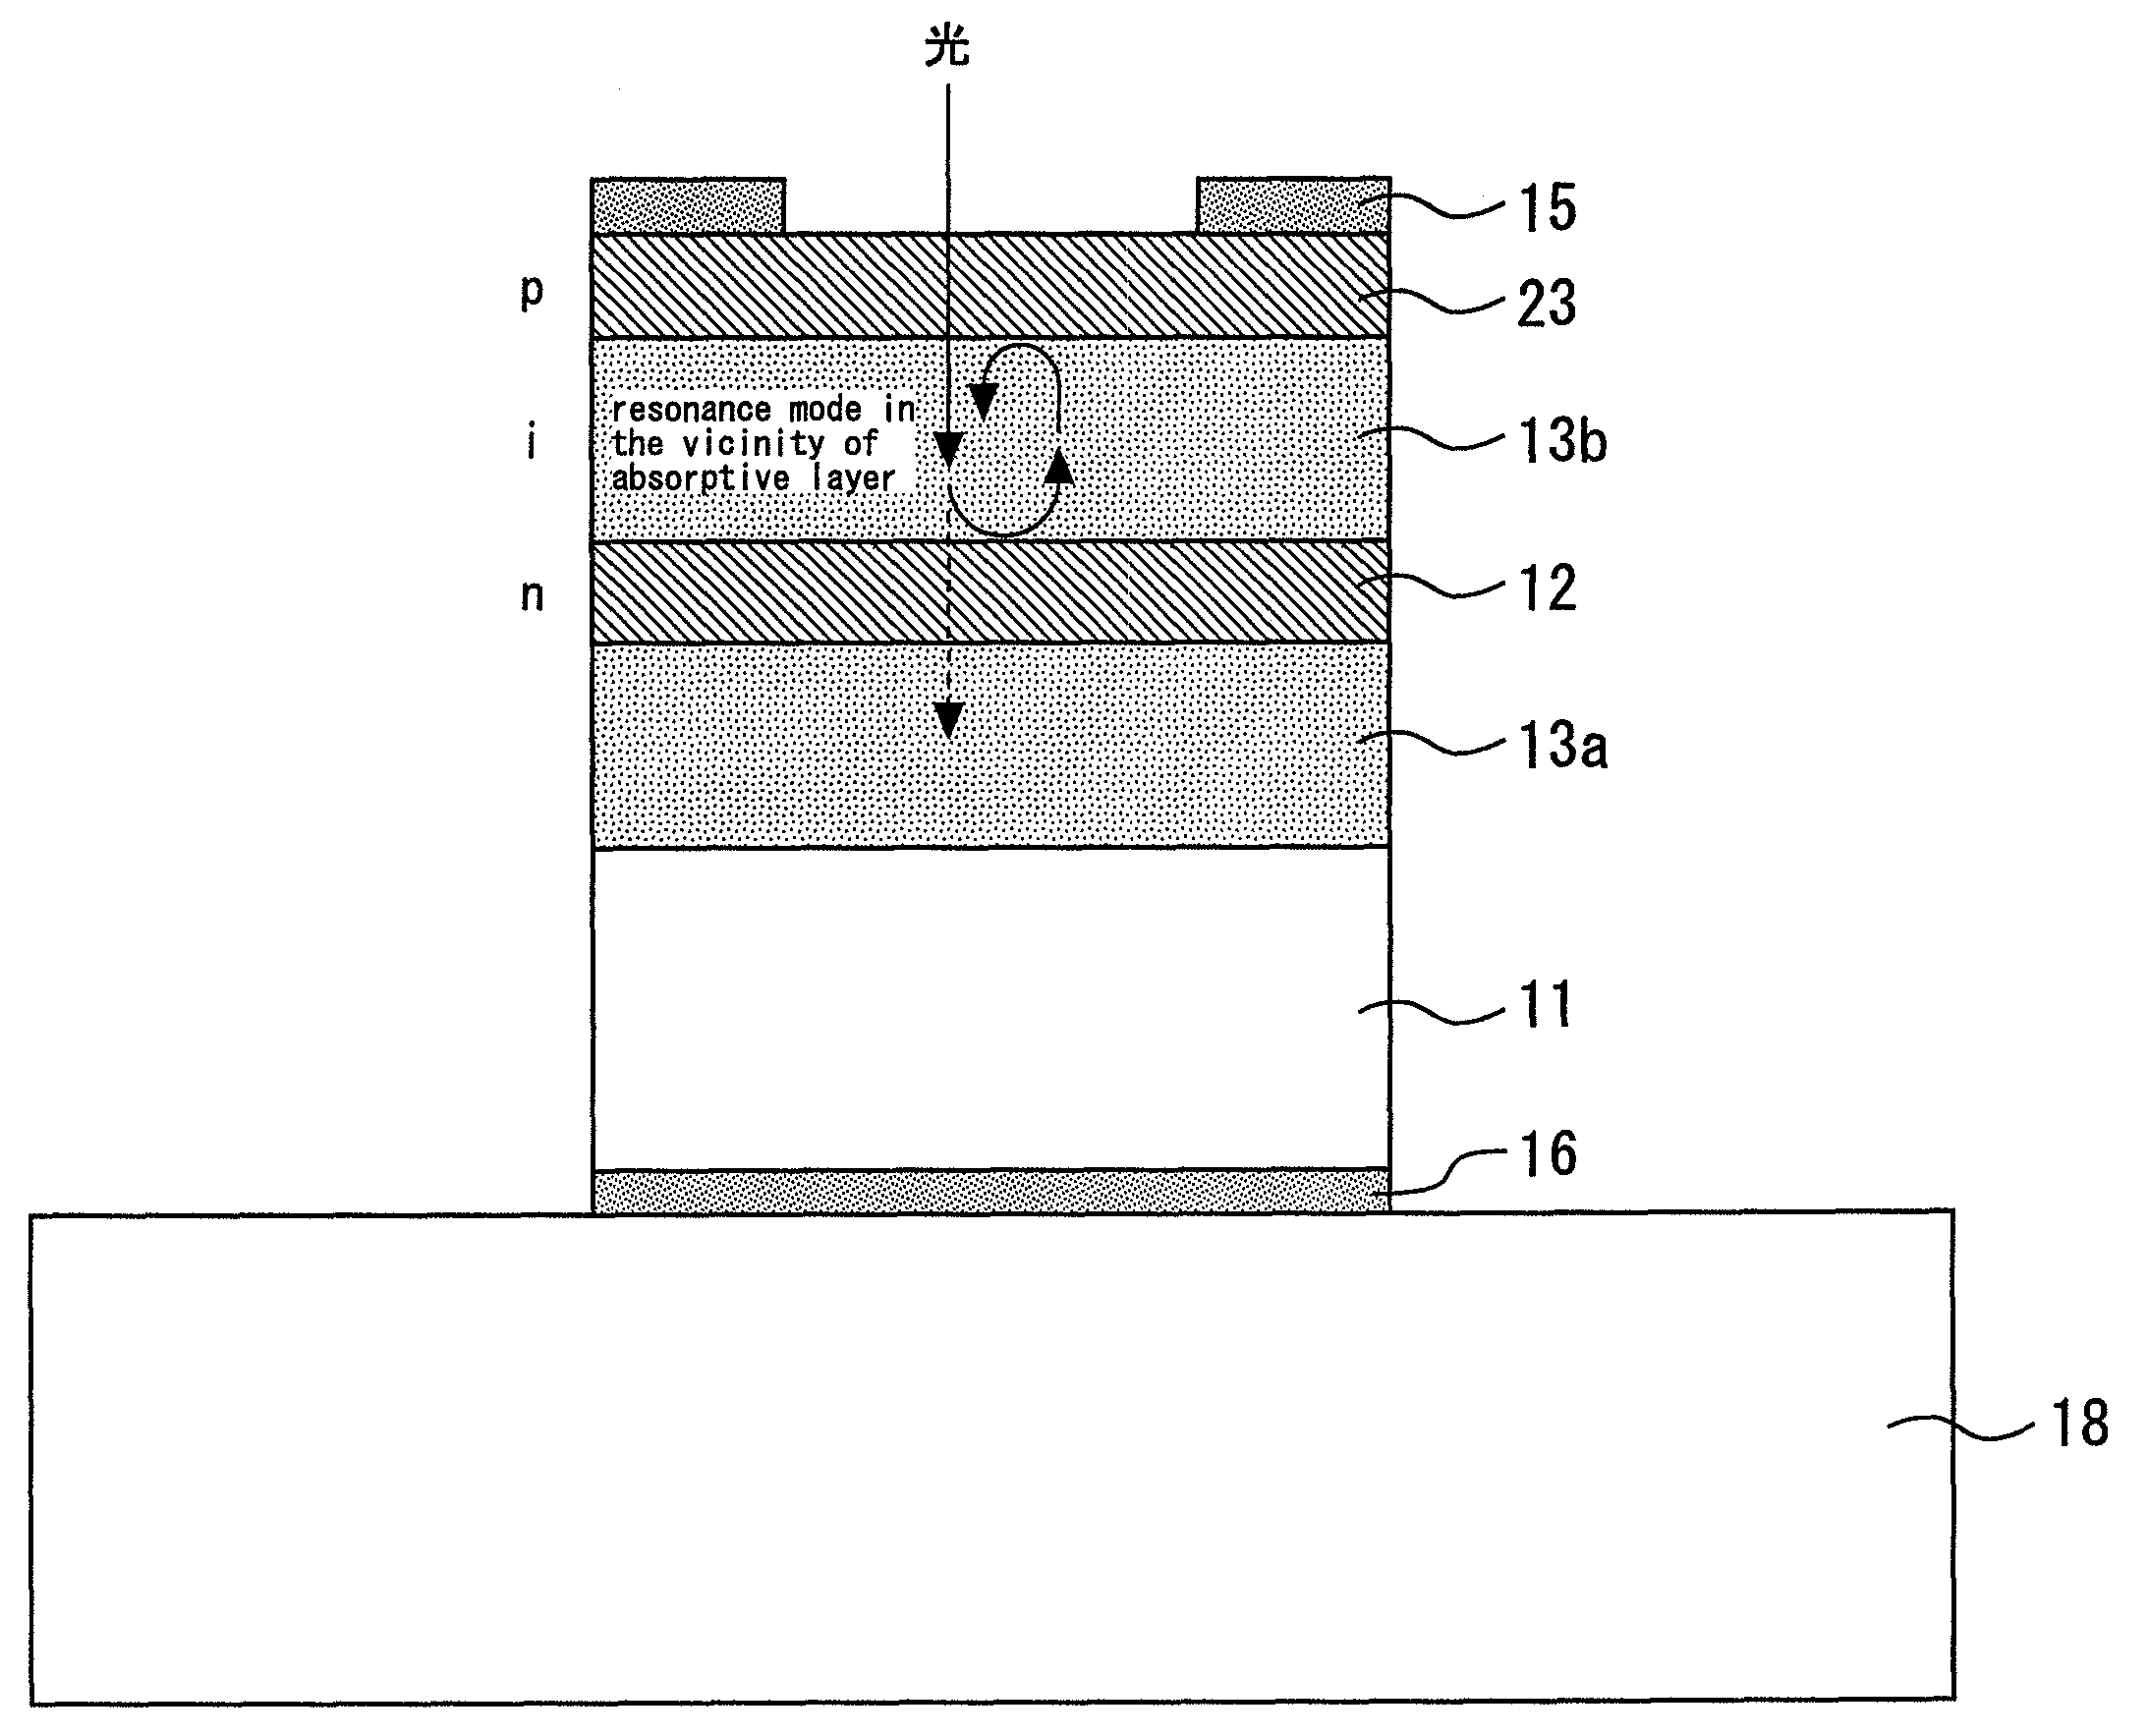 Semiconductor light detecting element including first and second multilayer light reflective structures sandwiching and contacting a light absorptive layer